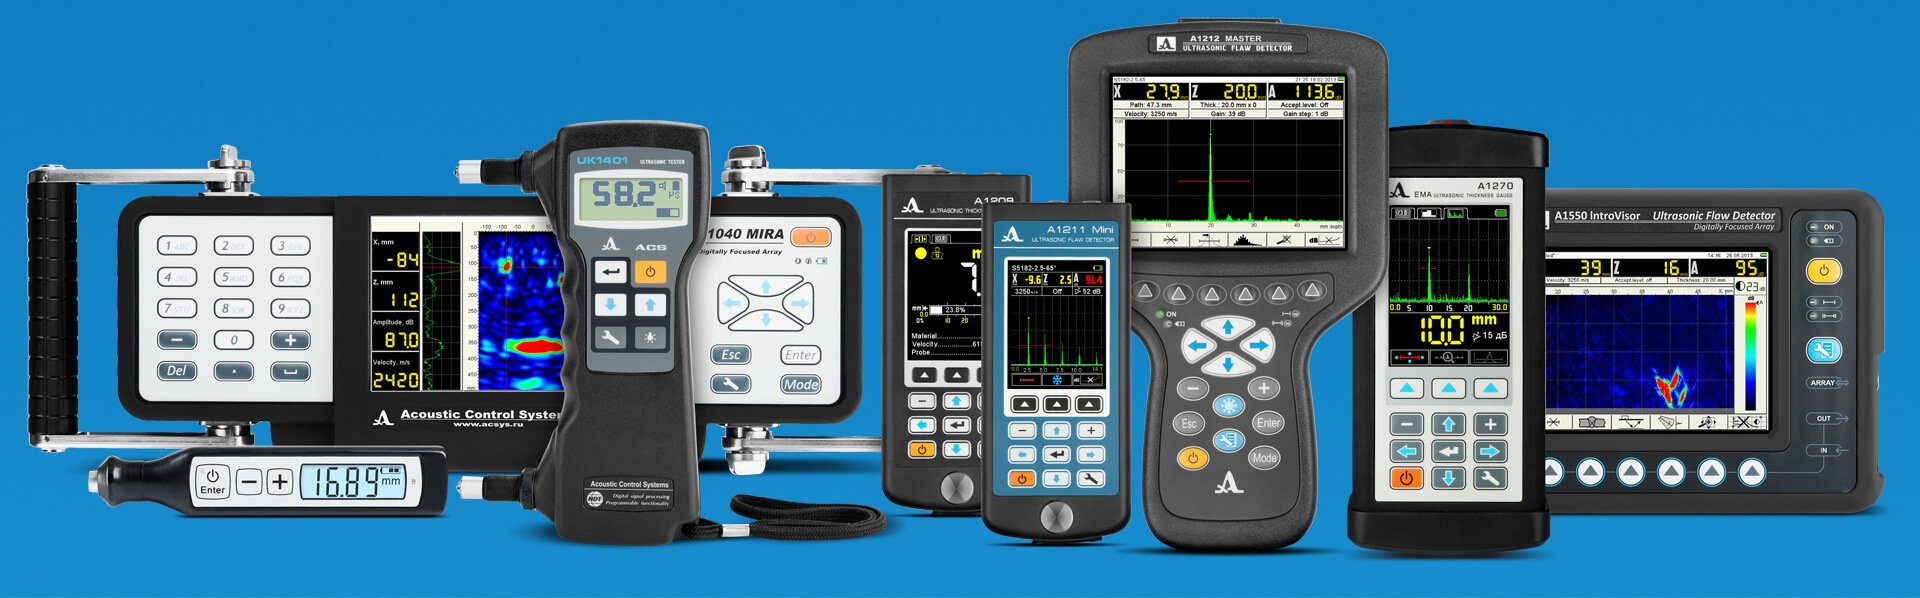 Ultrasonic testing instruments for metal, concrete and composite material testing